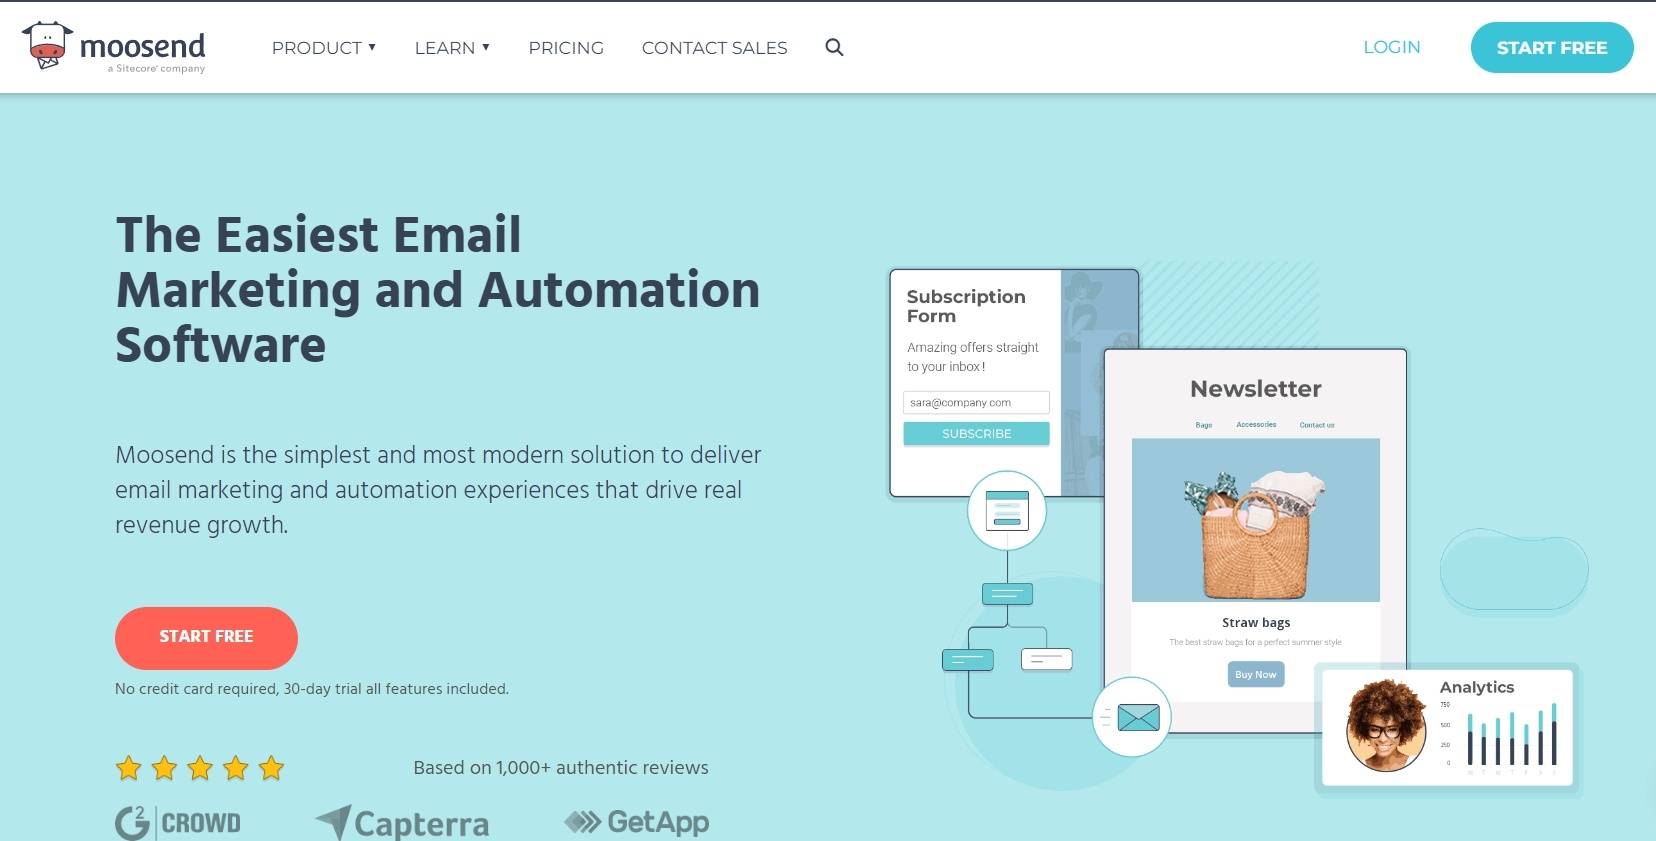 Moosend’s CRM for email marketing and automation creation